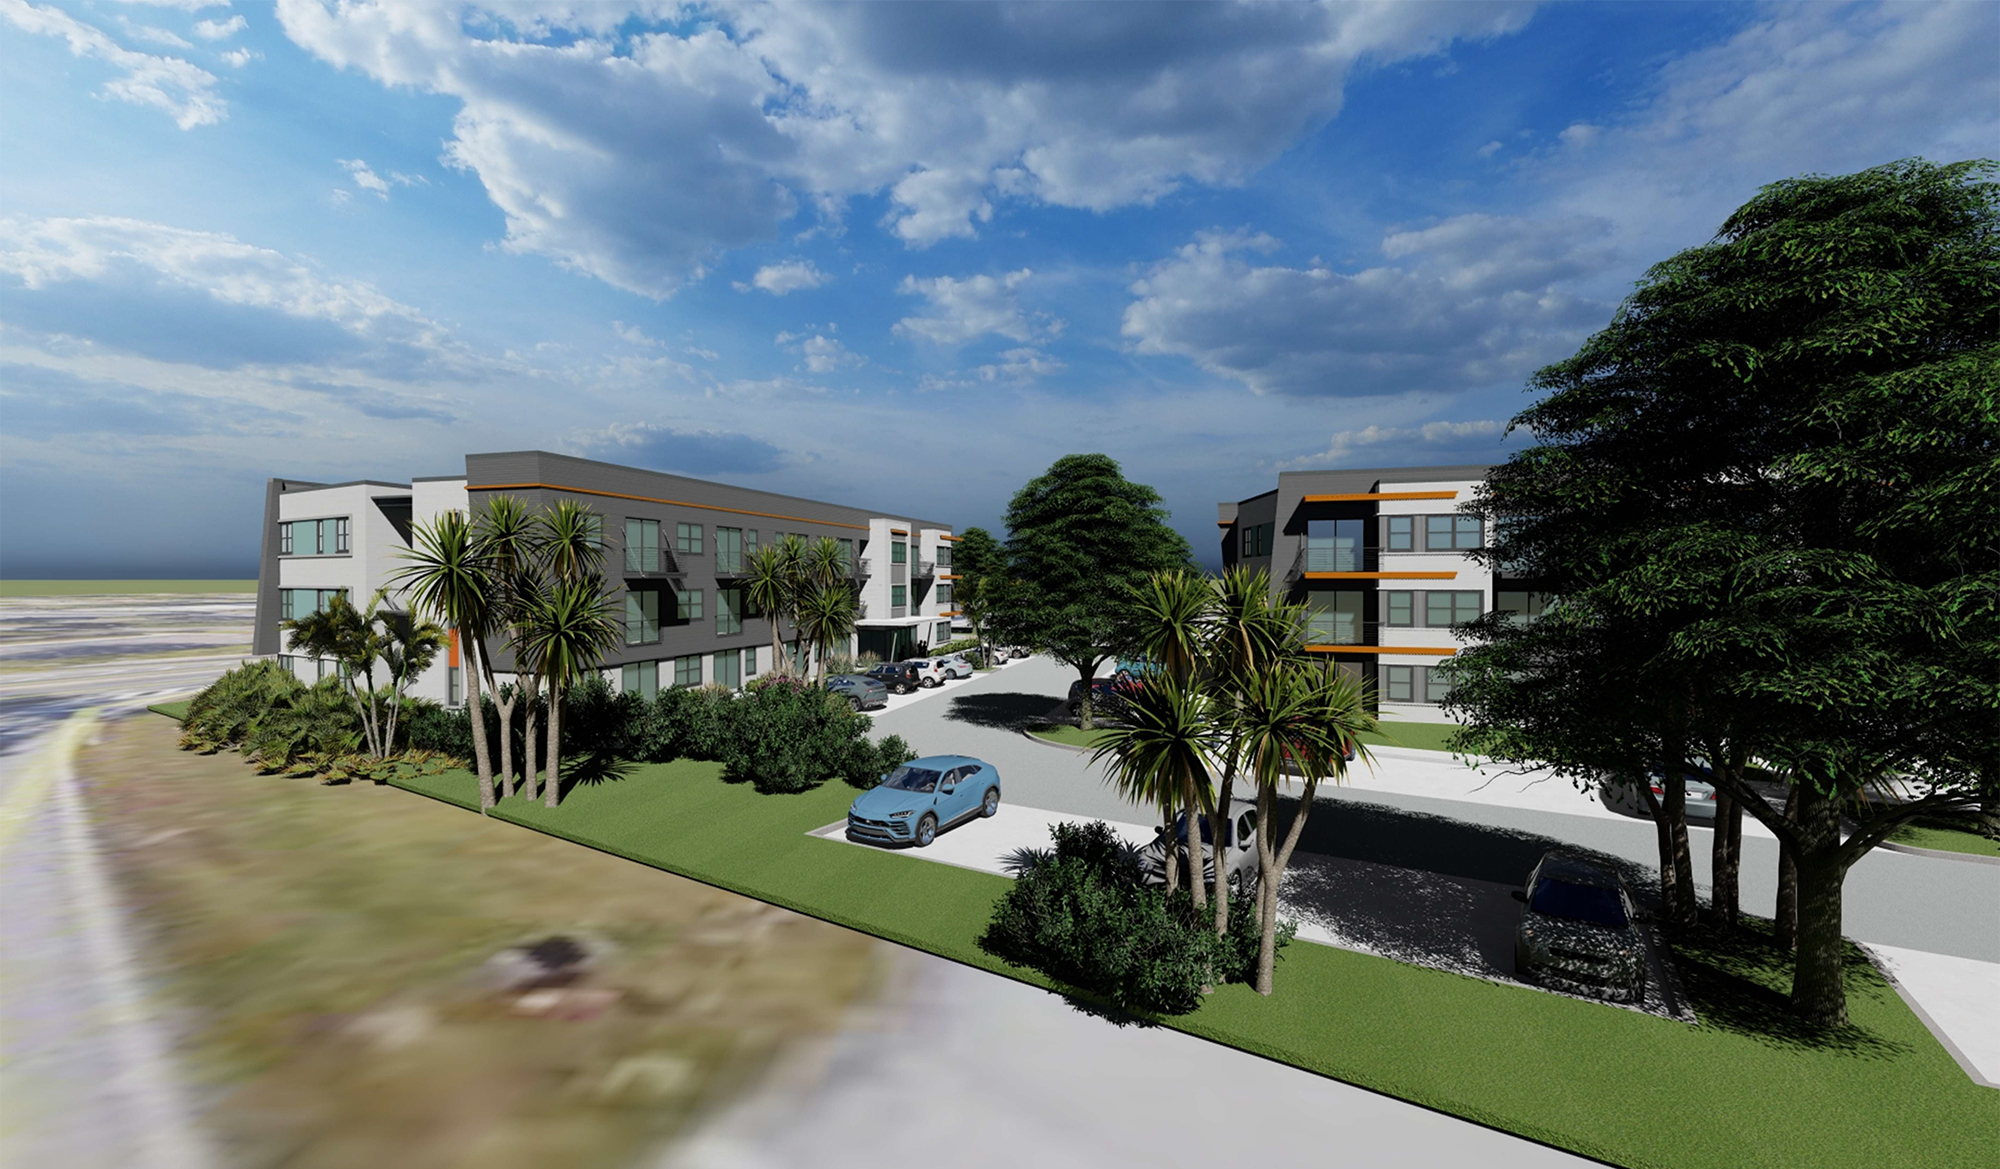 Renderings show two residential structures with a combined 24,000 square feet and 90 units.